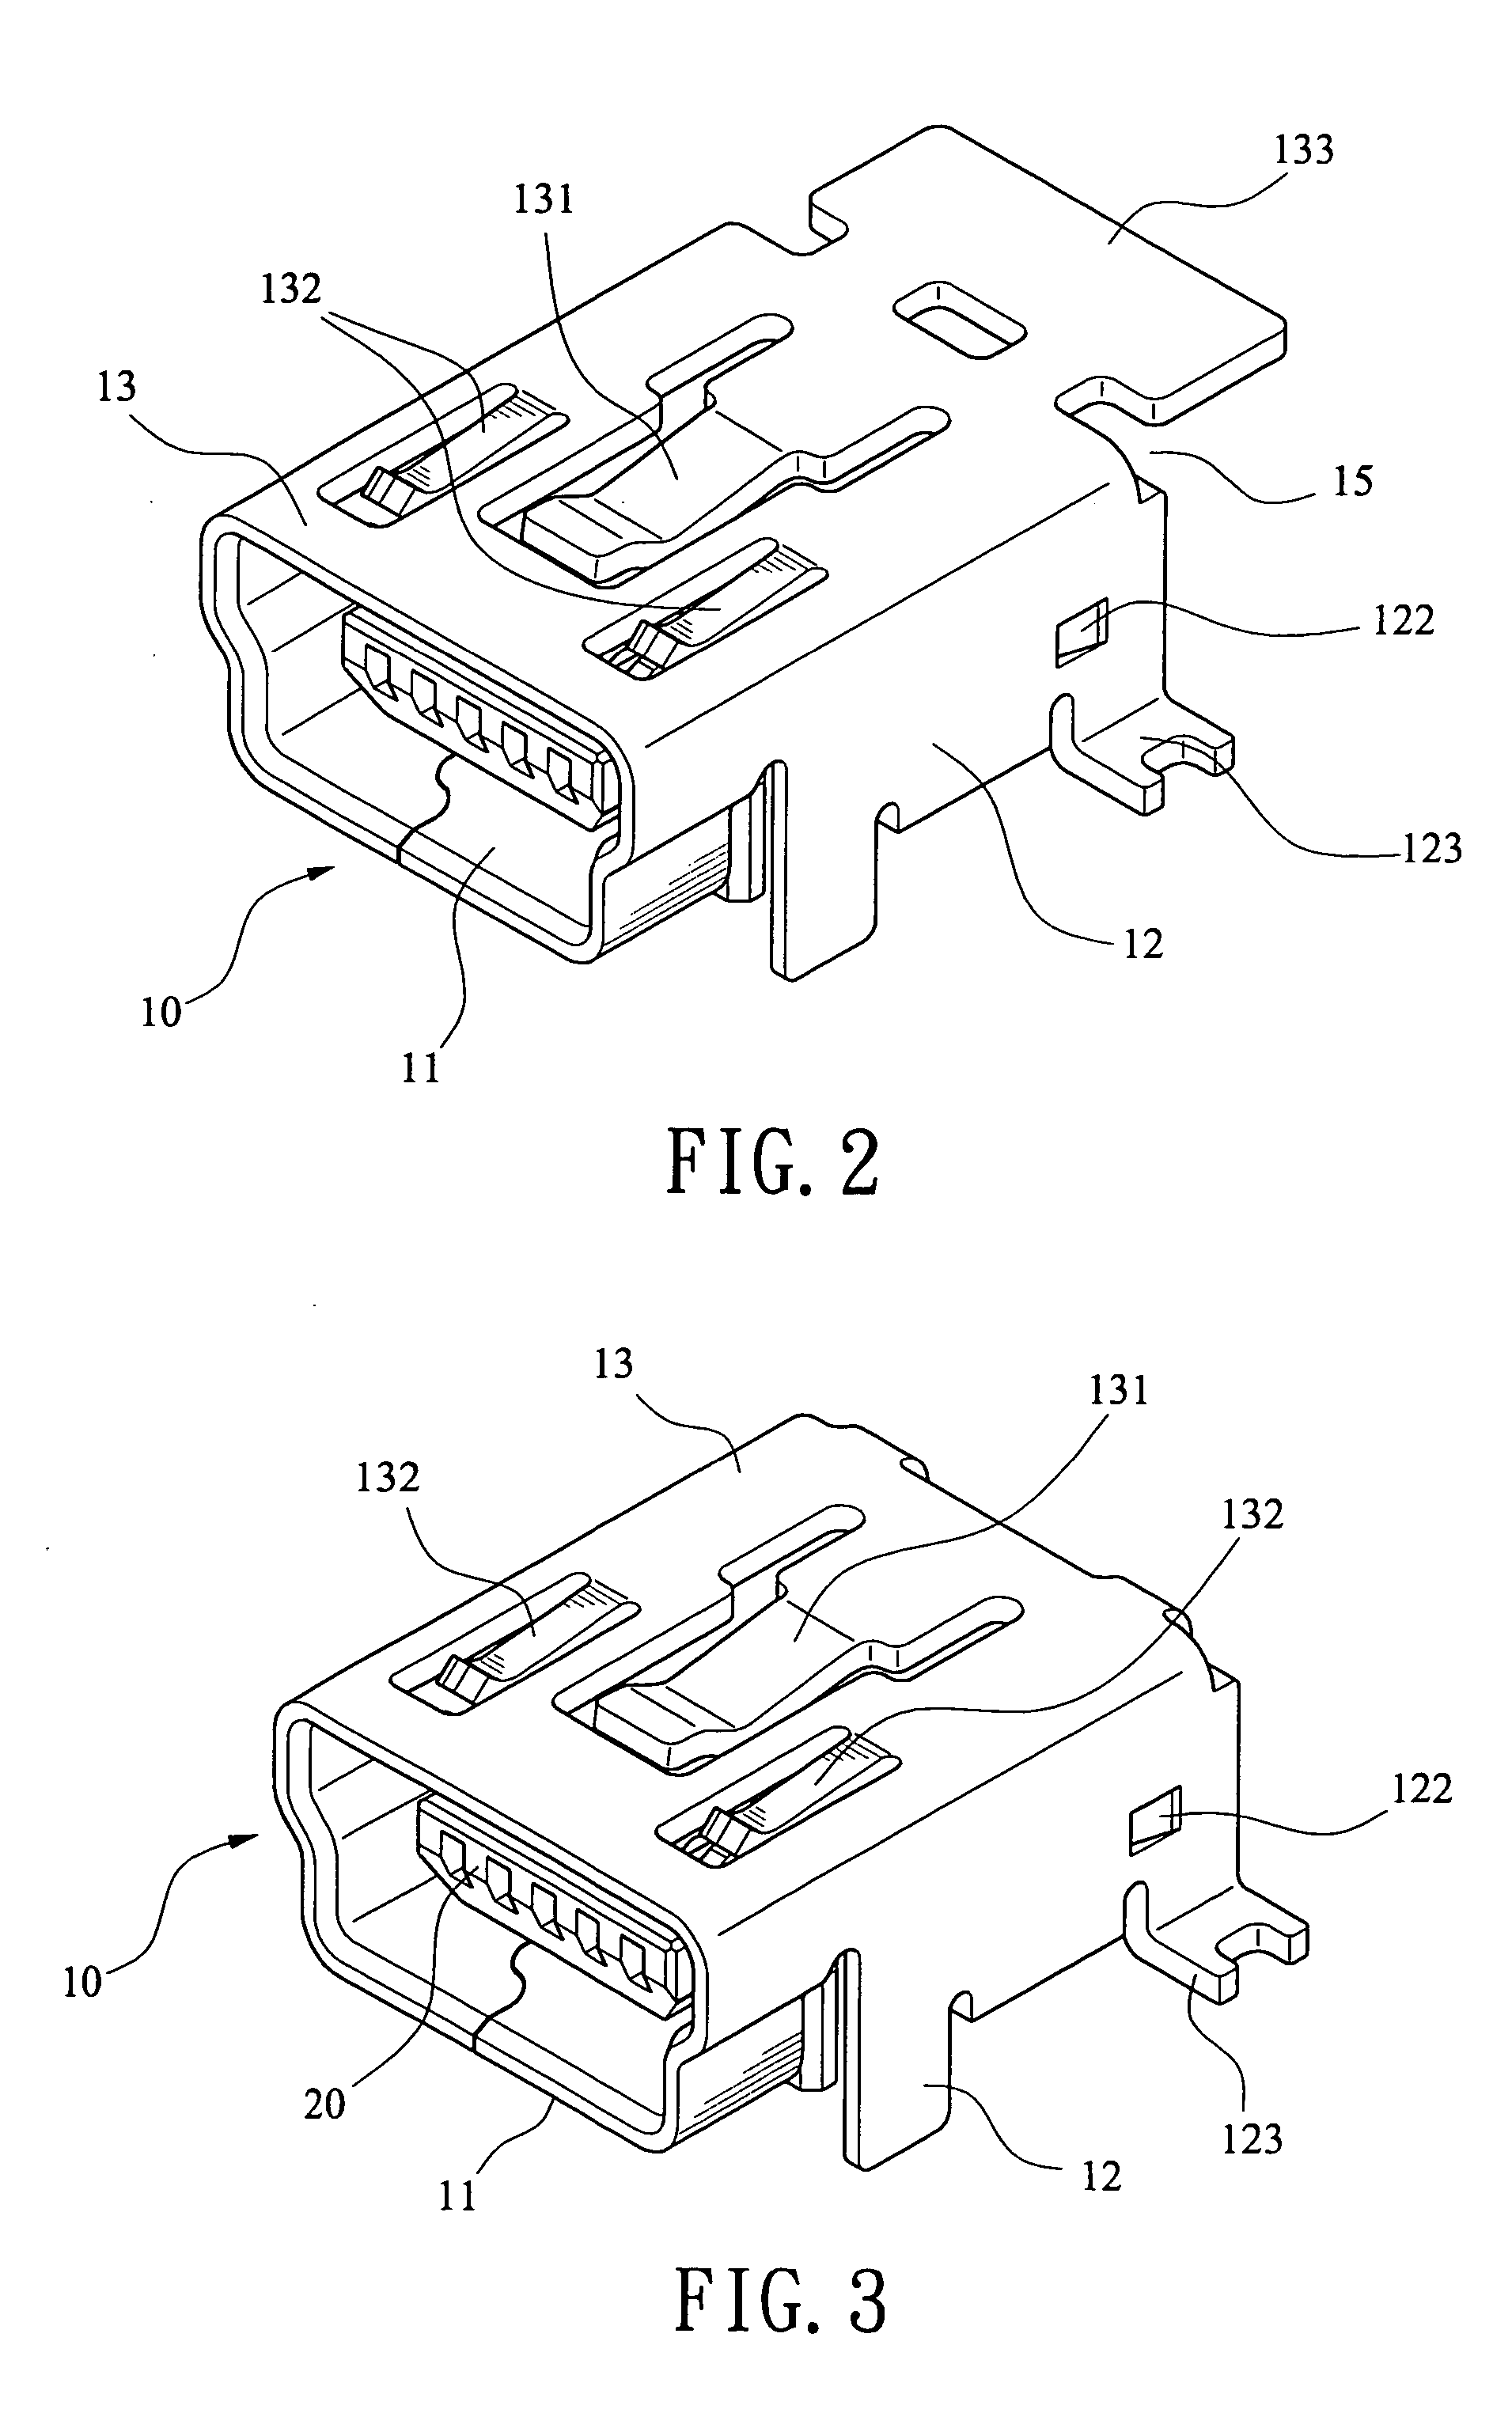 Mini-USB type electrical connector with latching arrangement